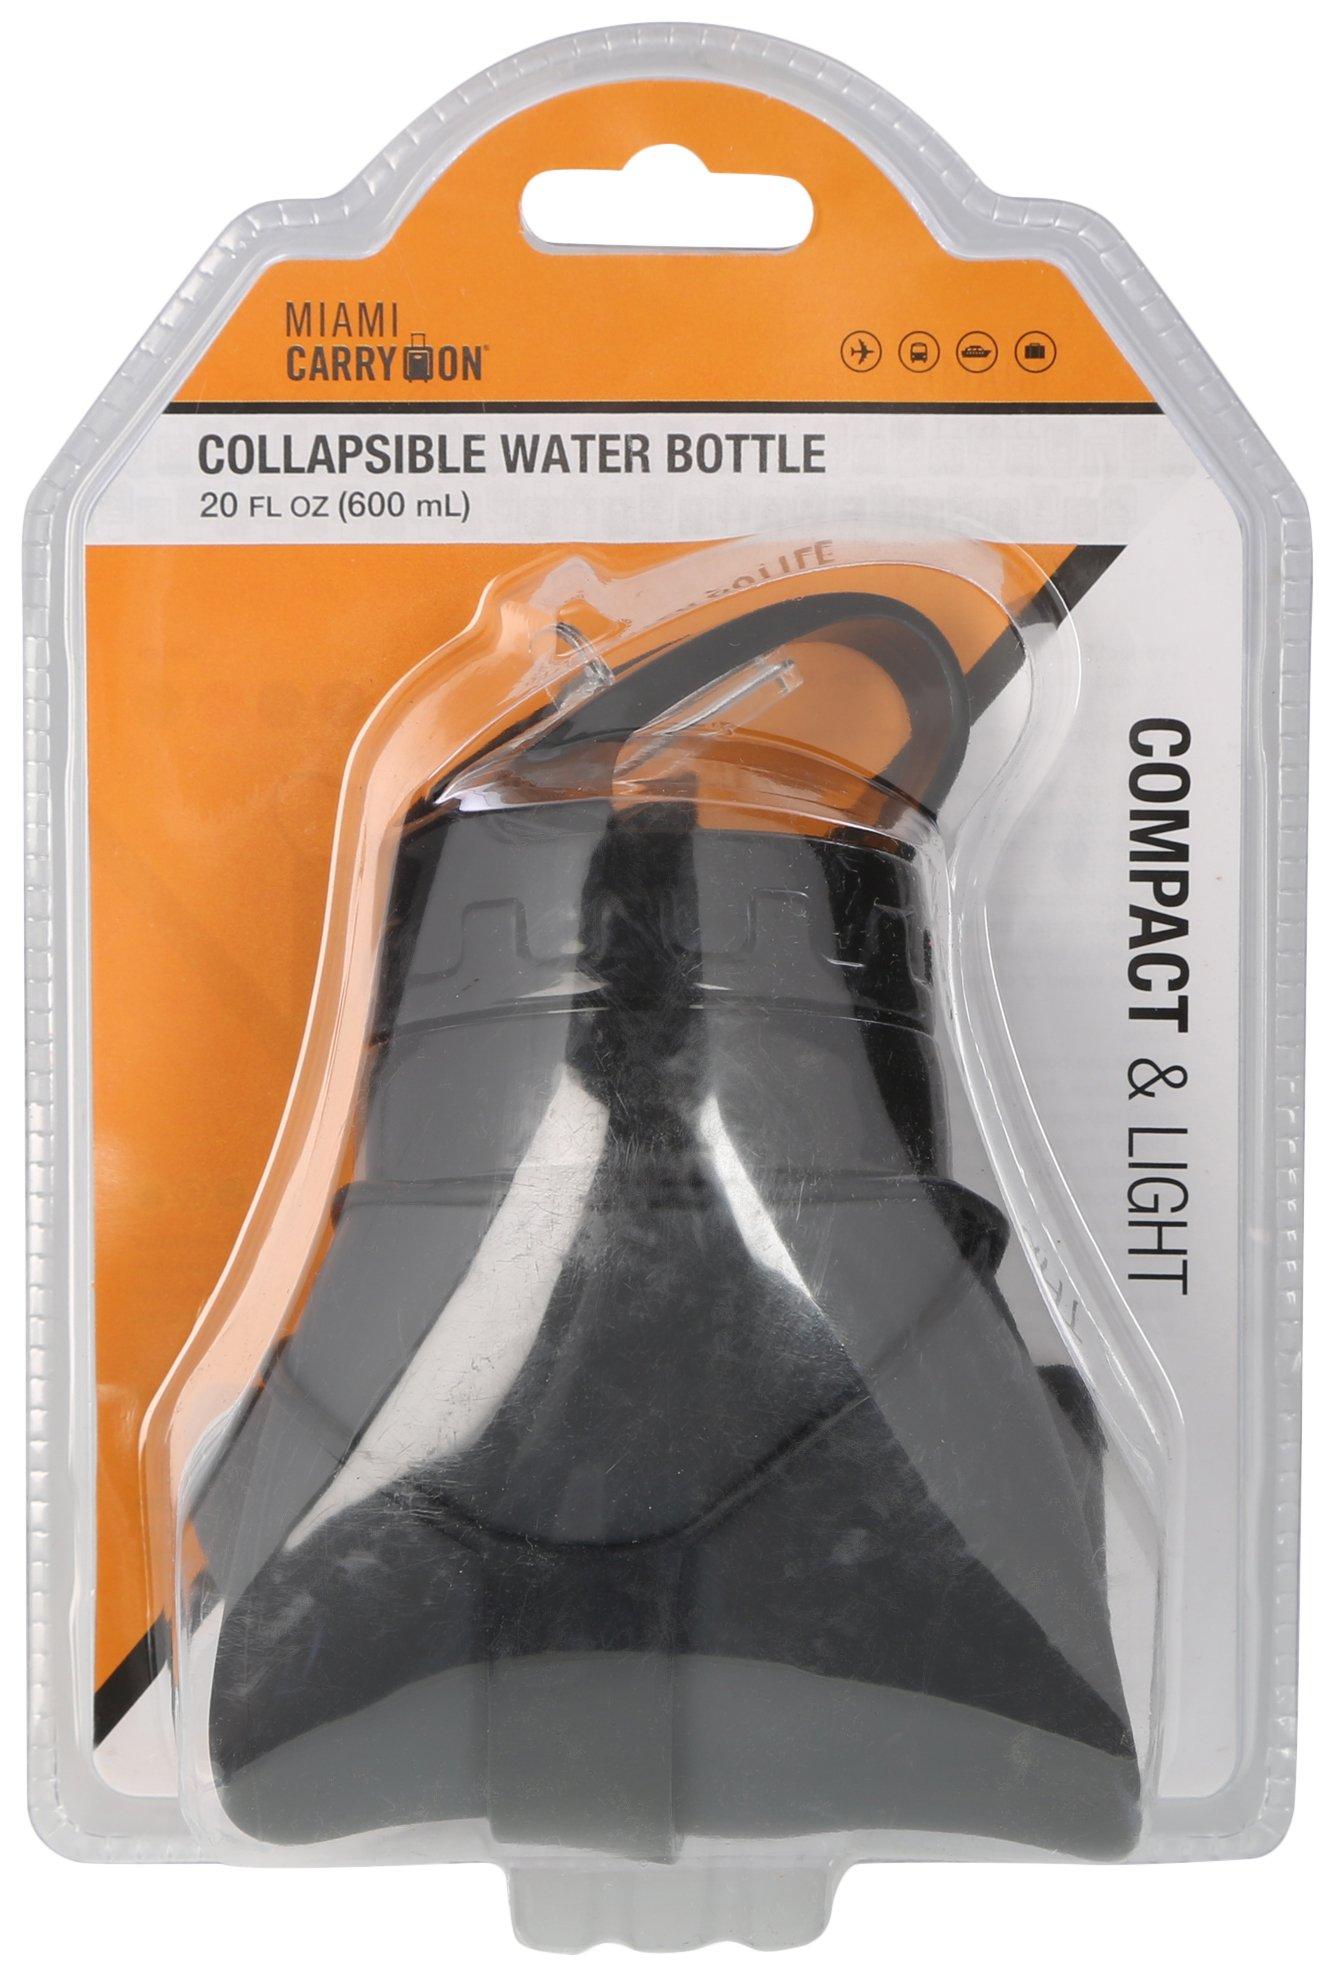 20 Oz. Collapsible Water Bottle